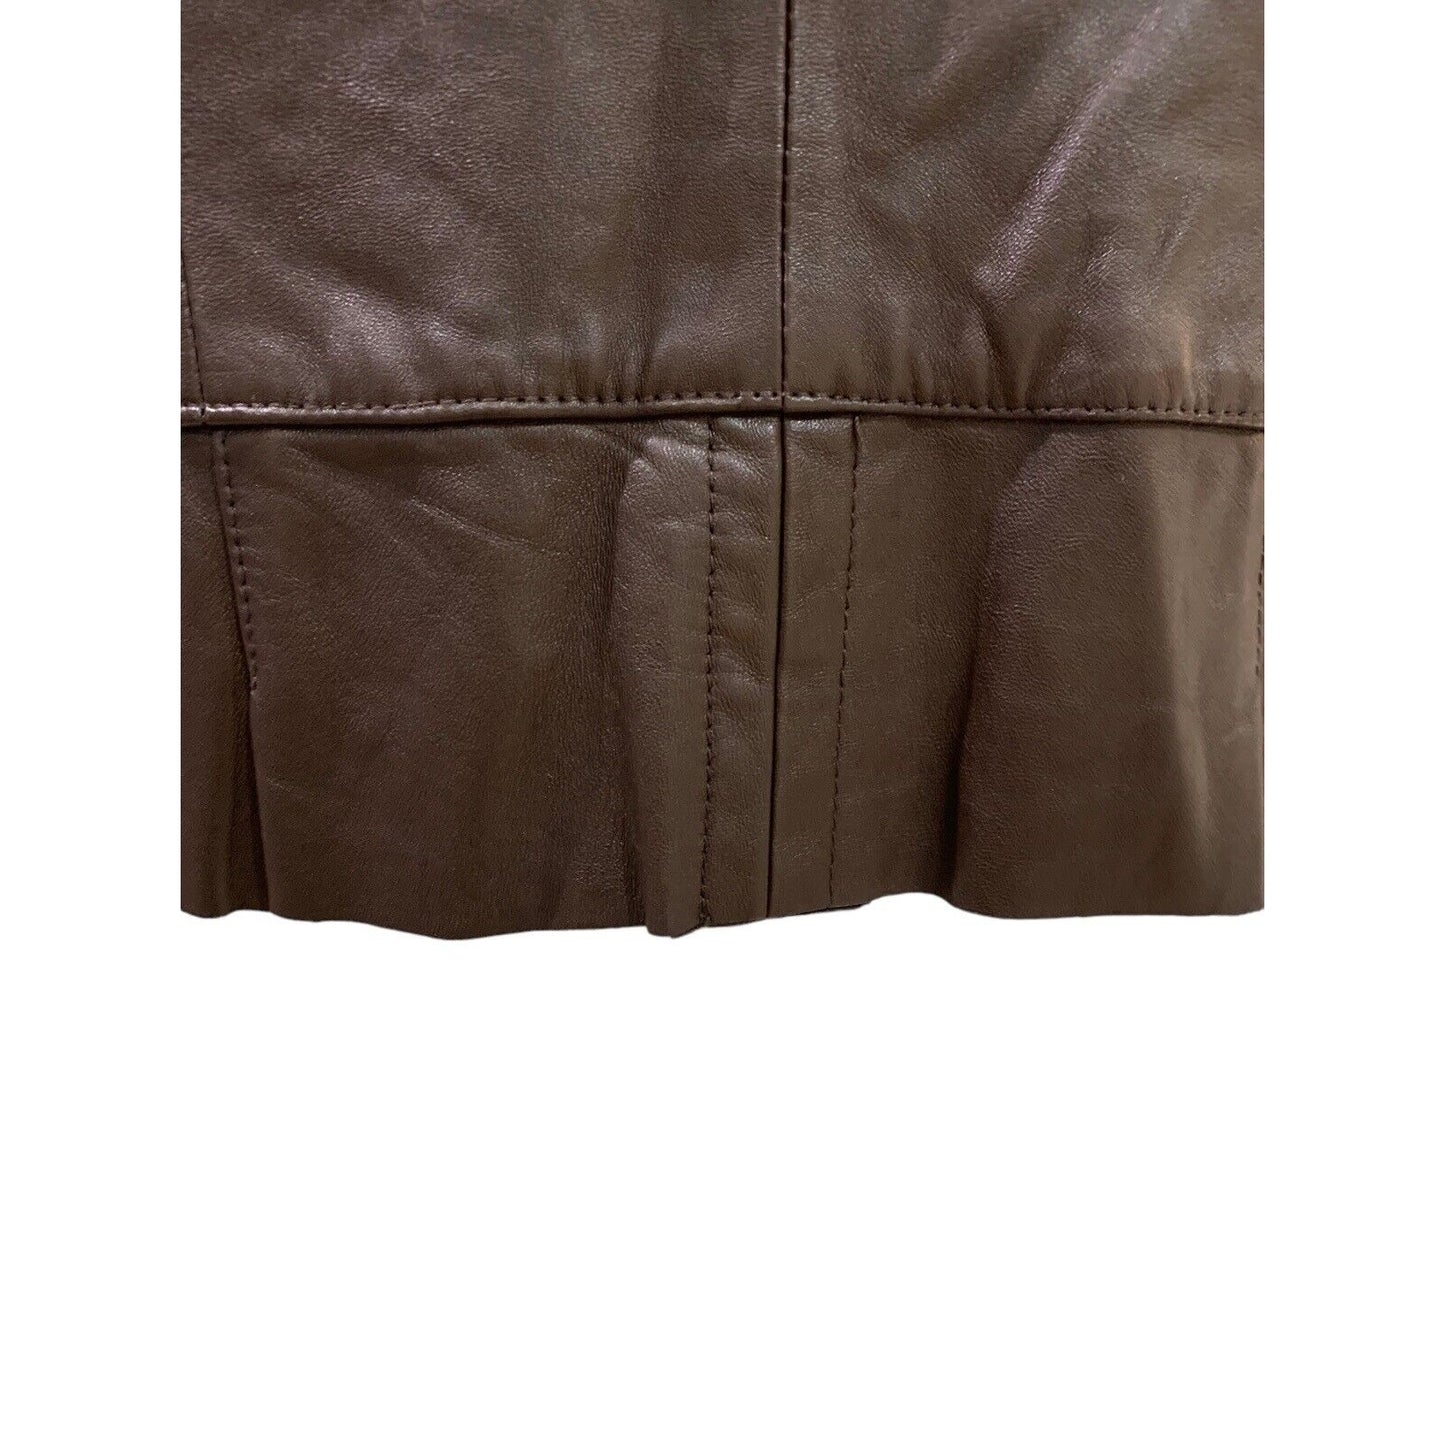 Women’s Leather Jacket With Pleated Peplum Details By Daisy Fuentes